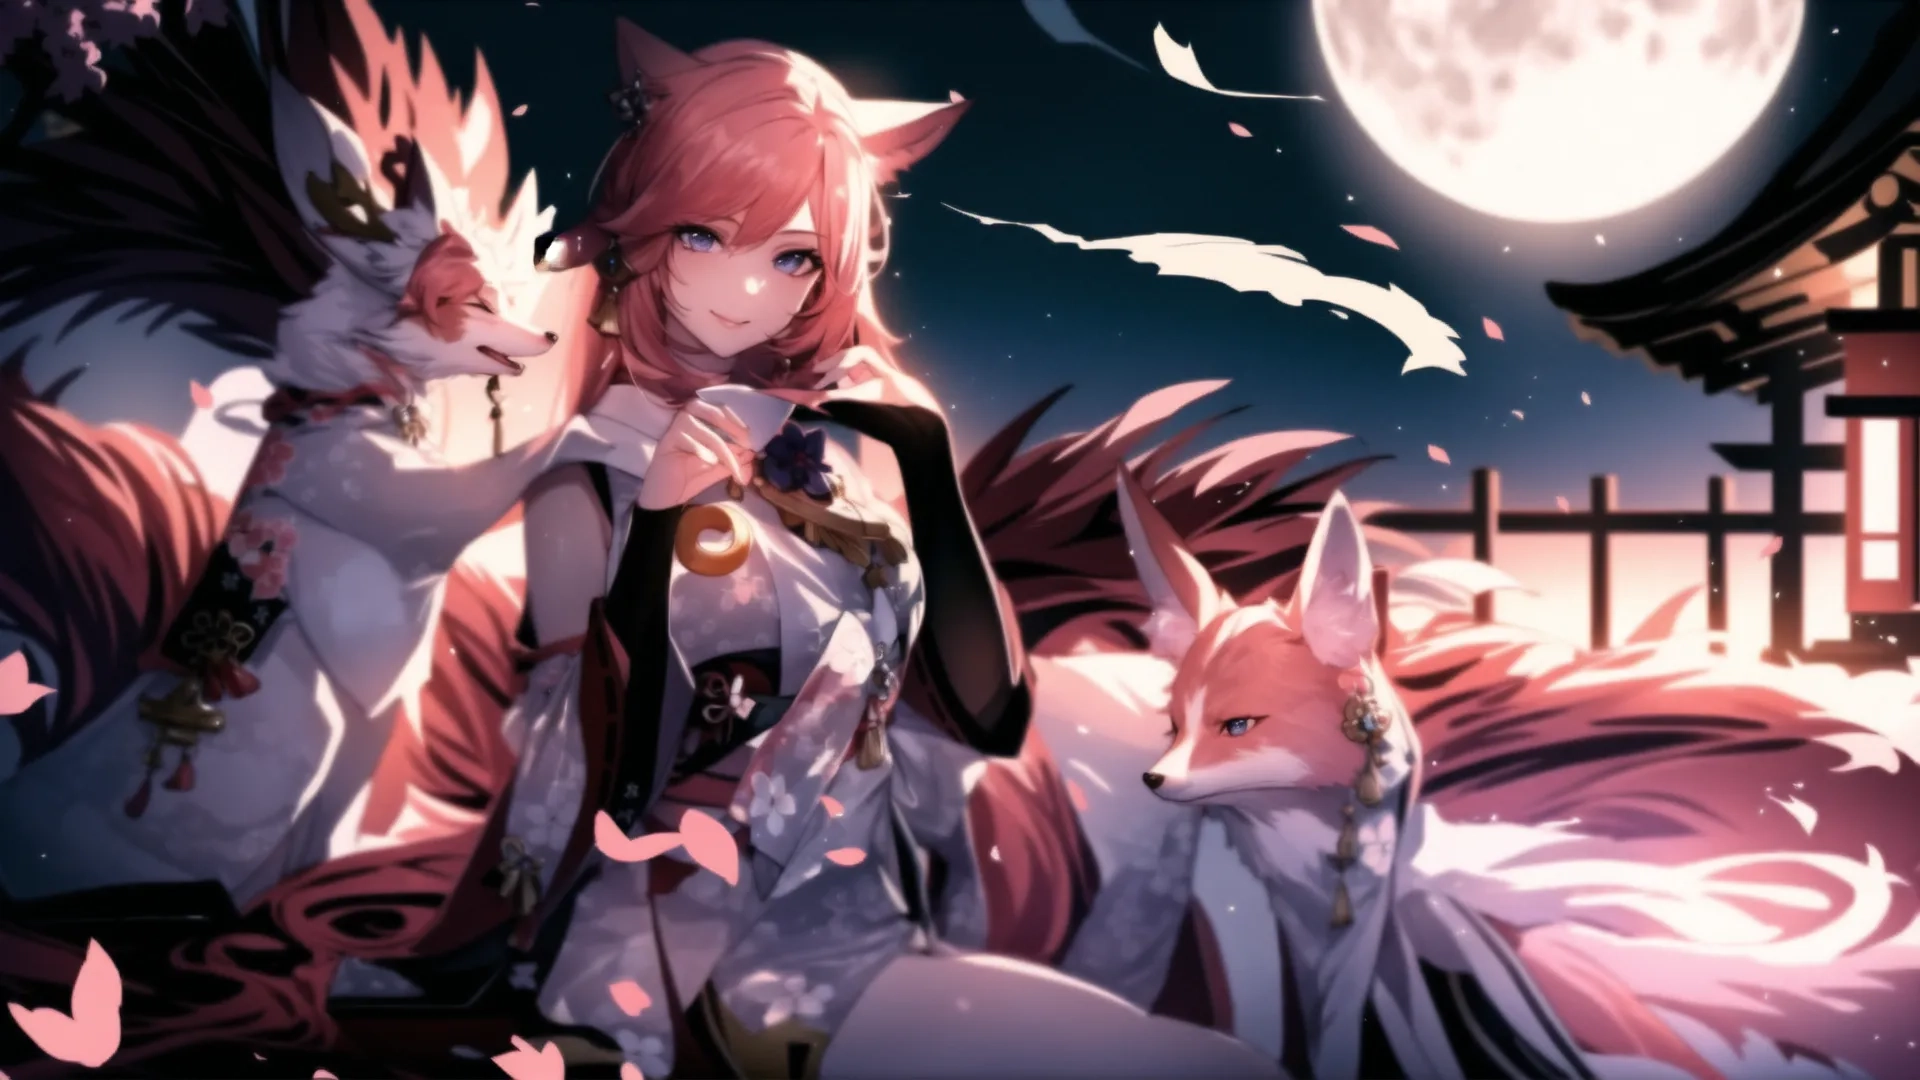 a woman in a white and pink dress poses with two foxes and cat dolls on a field of blossom petals at night with the moon in the background
